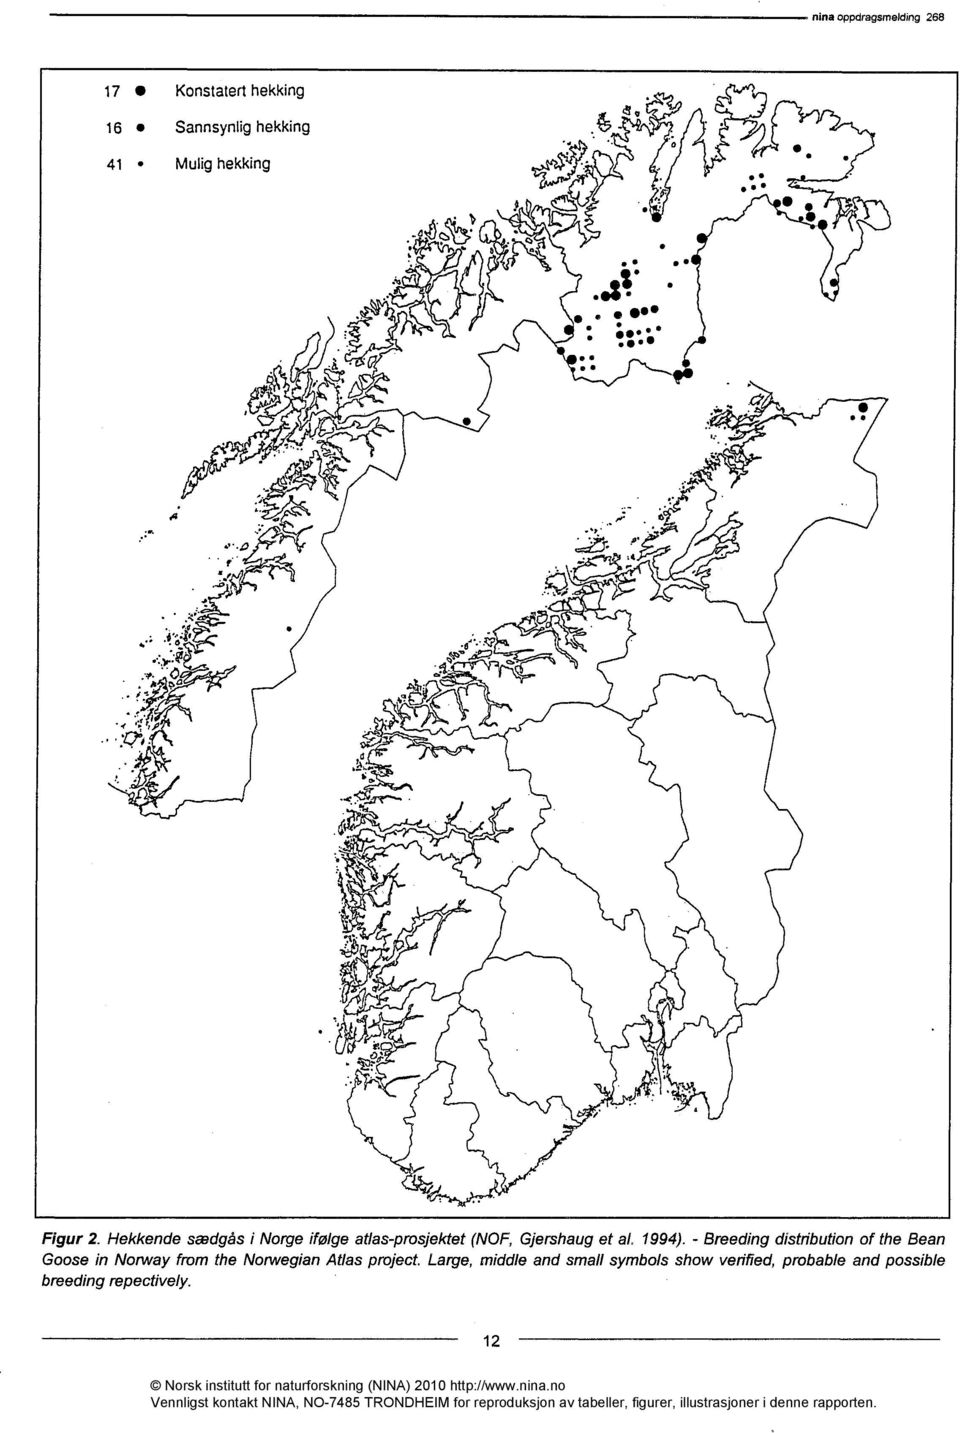 - Breeding distribution of the Bean Goose in NortAlay from the Norwegian Atlas project.